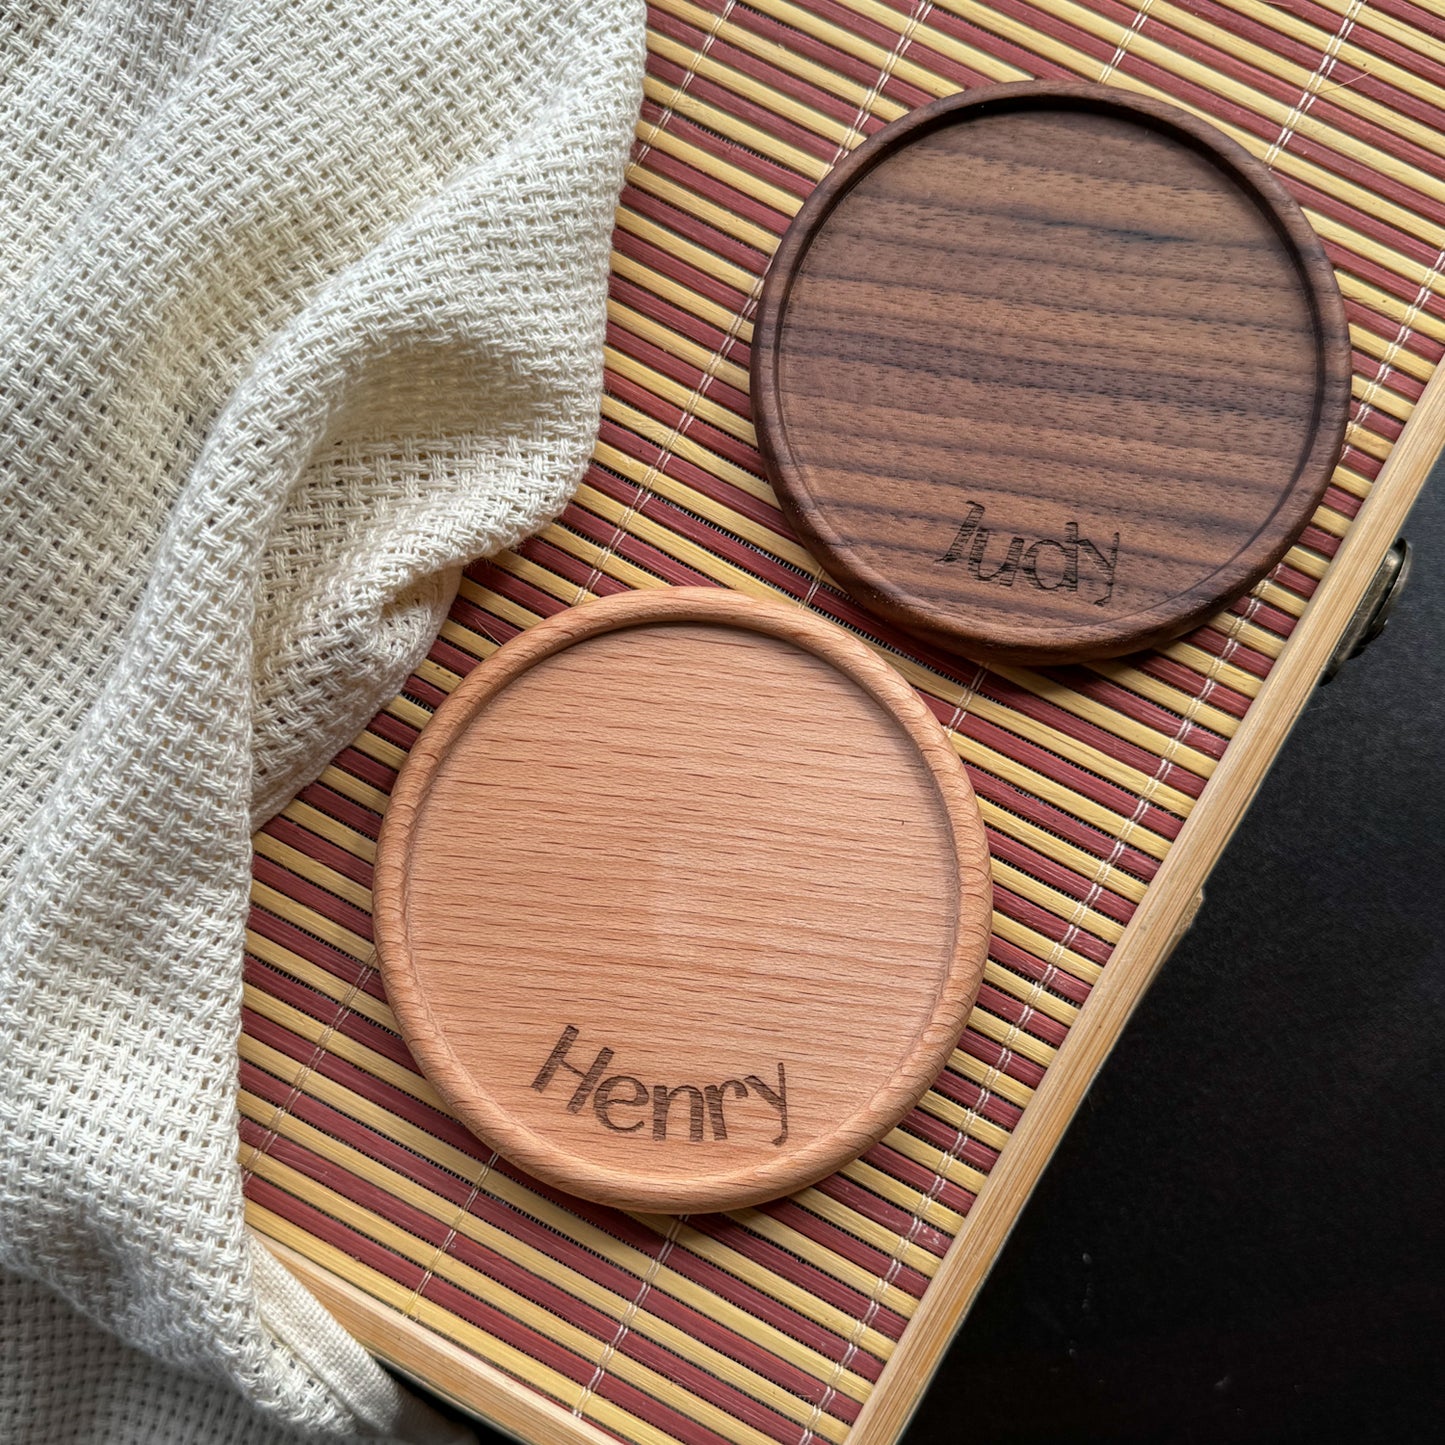 Personalised Wood Coaster Wedding Door Gifts/Place Cards Singapore